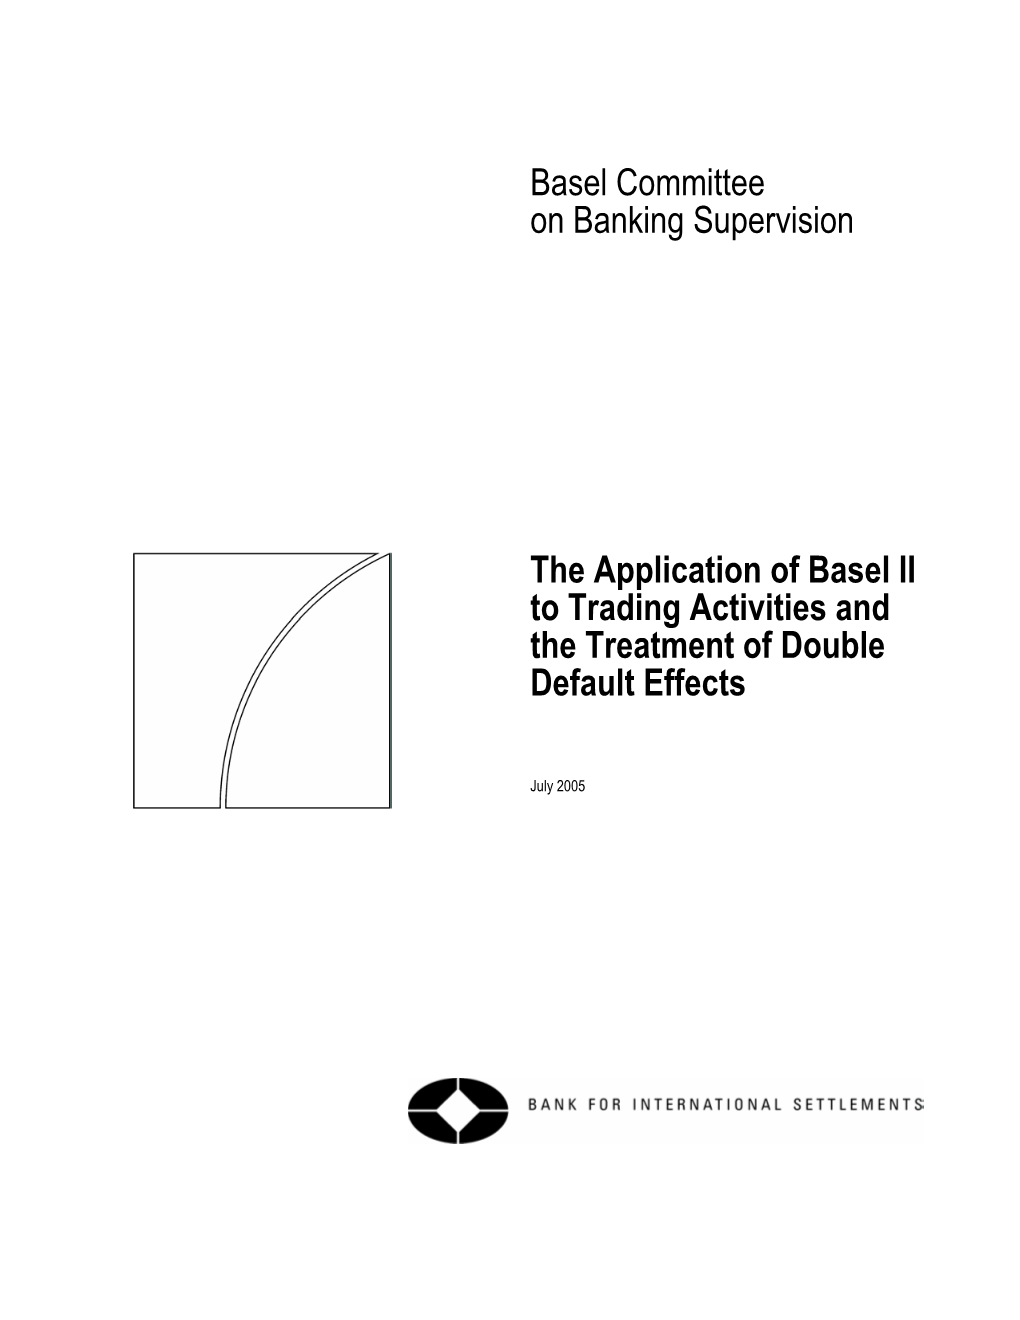 The Application of Basel II to Trading Activities and the Treatment of Double Default Effects